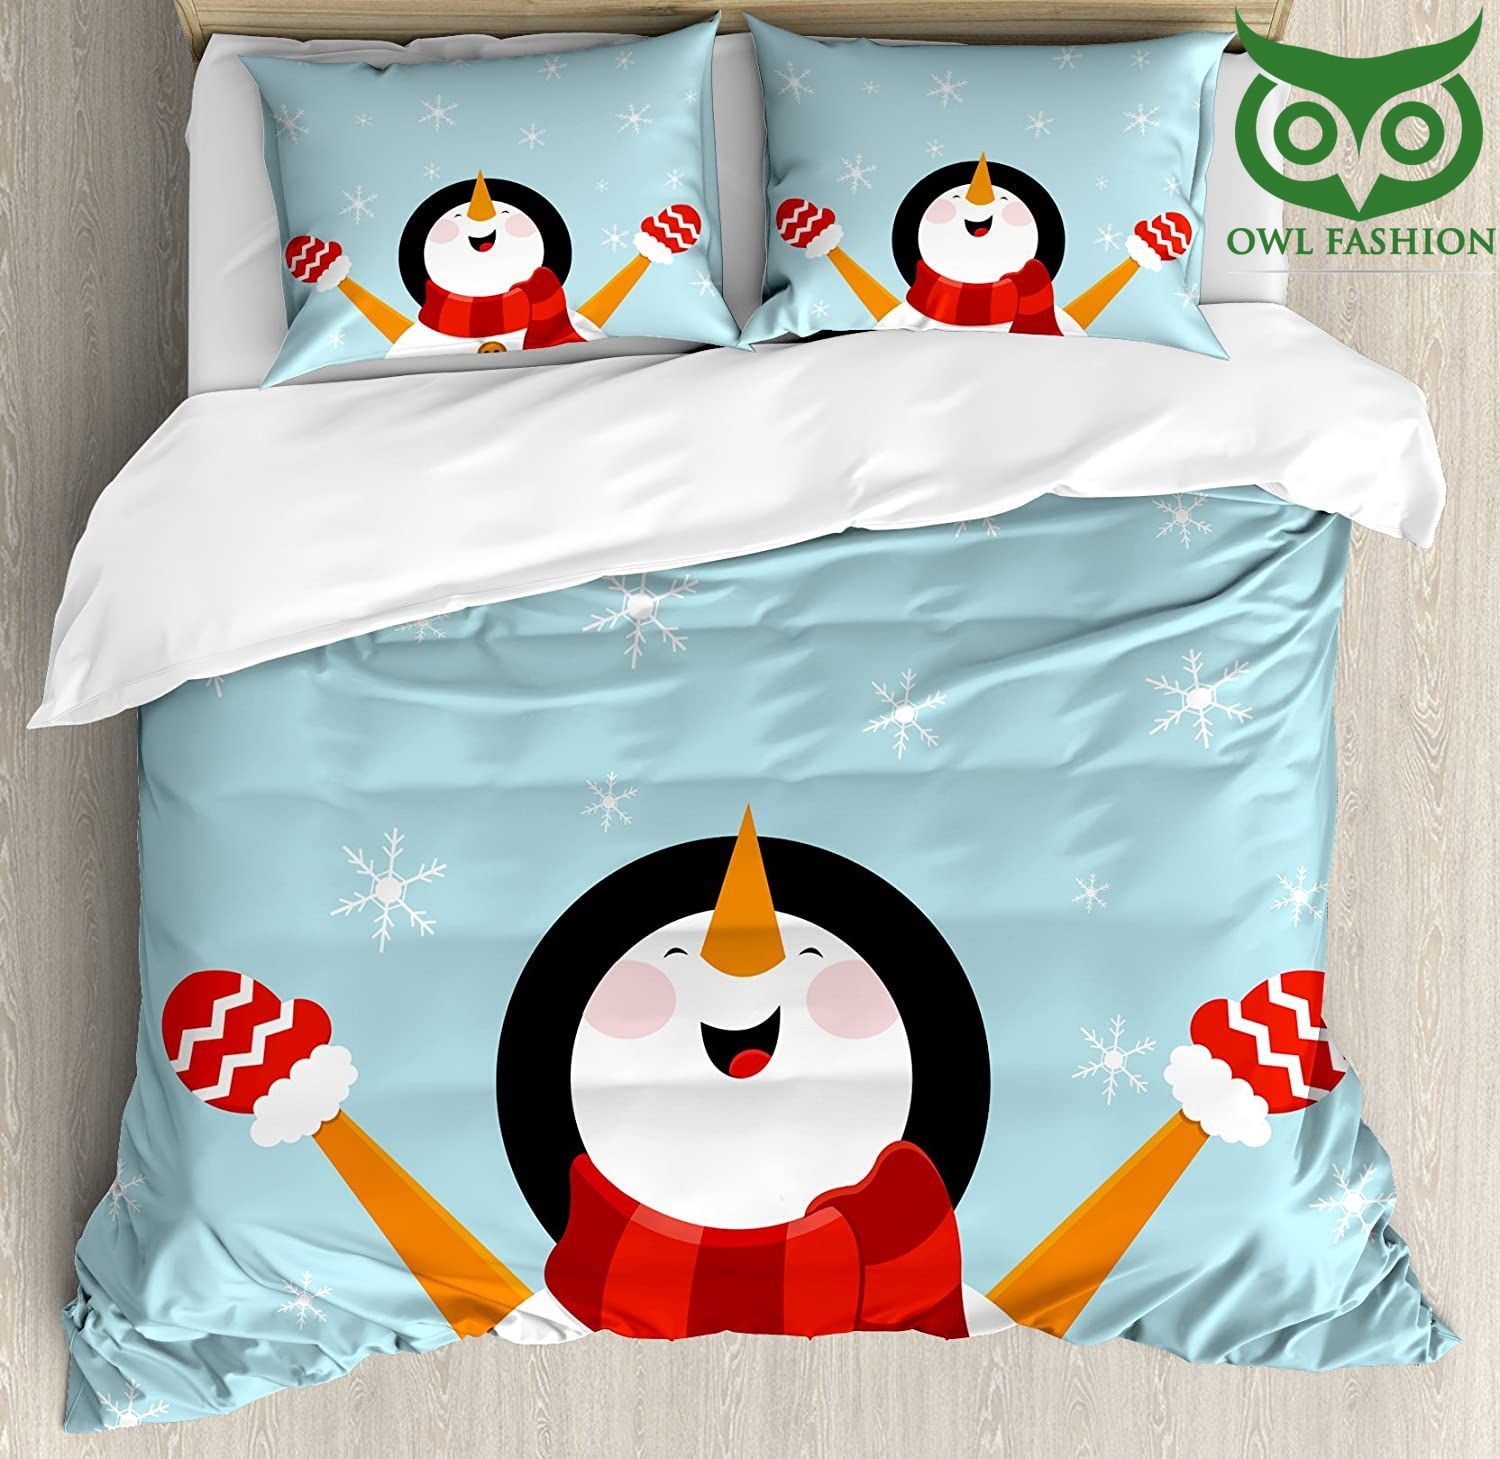 Snowman bedding set Happy Smiling Snowman with Ornate Snowflakes